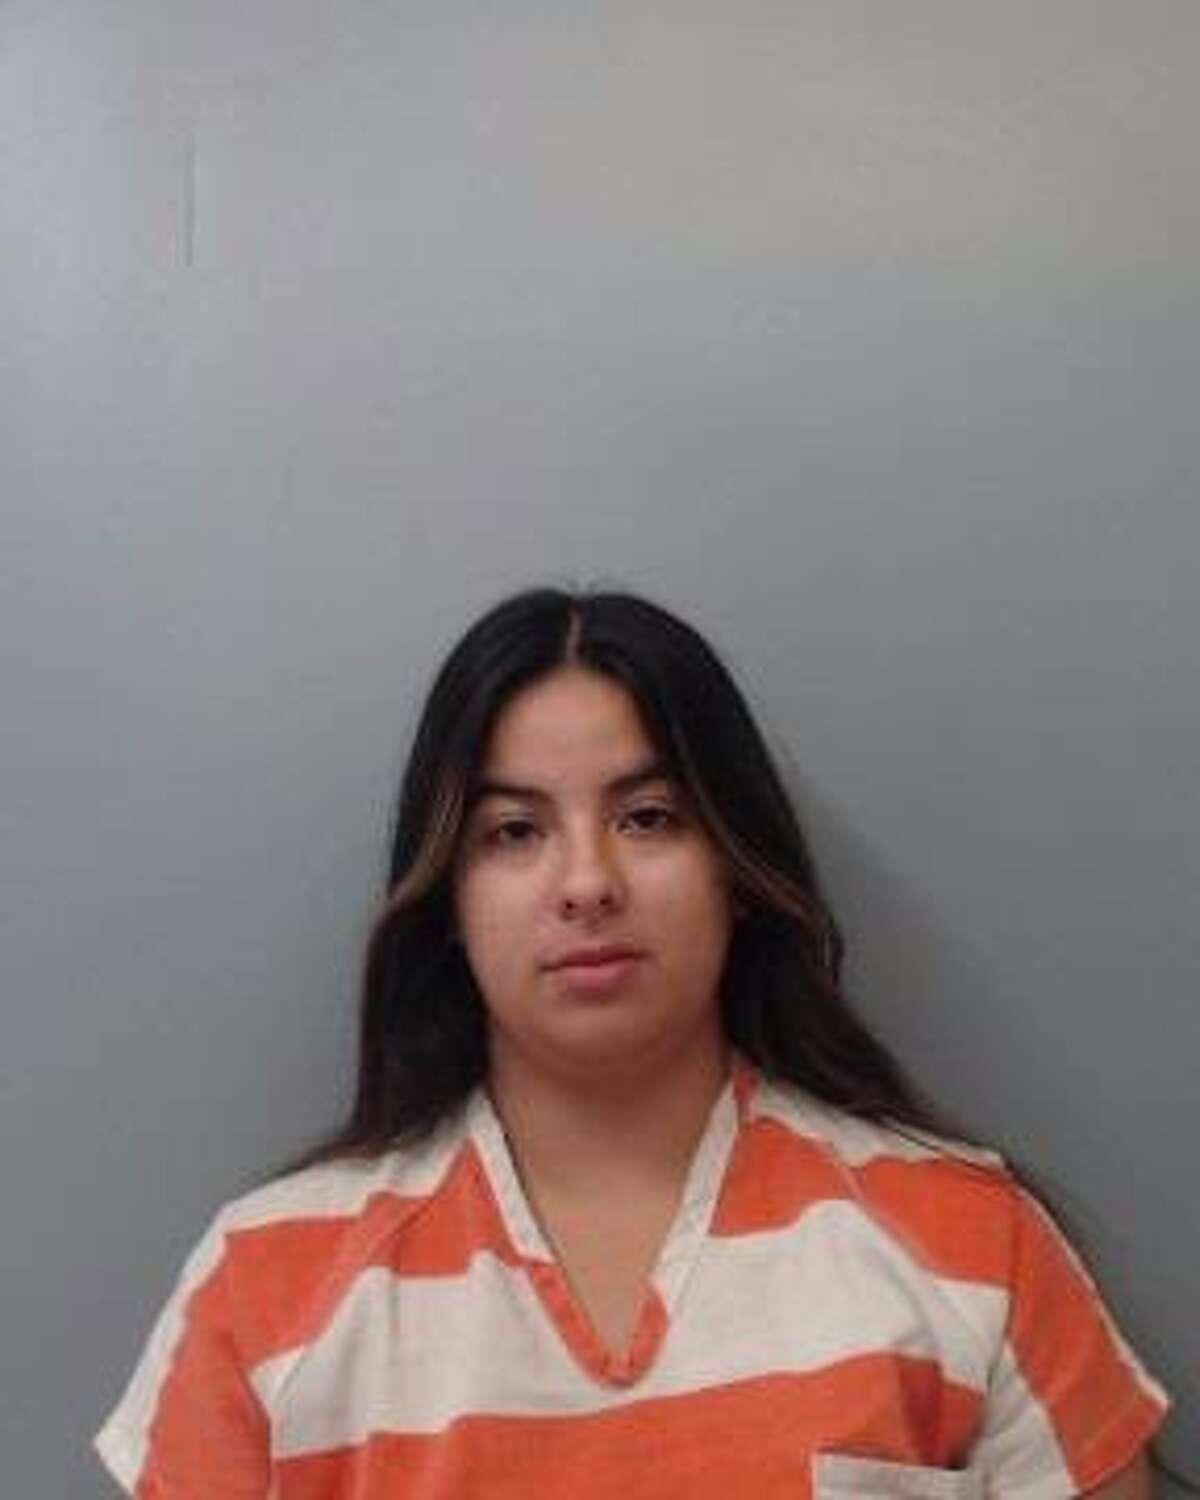 Kassandra Alvarado, 23, was arrested and charged with two counts of abandonment of a child with intent to return.